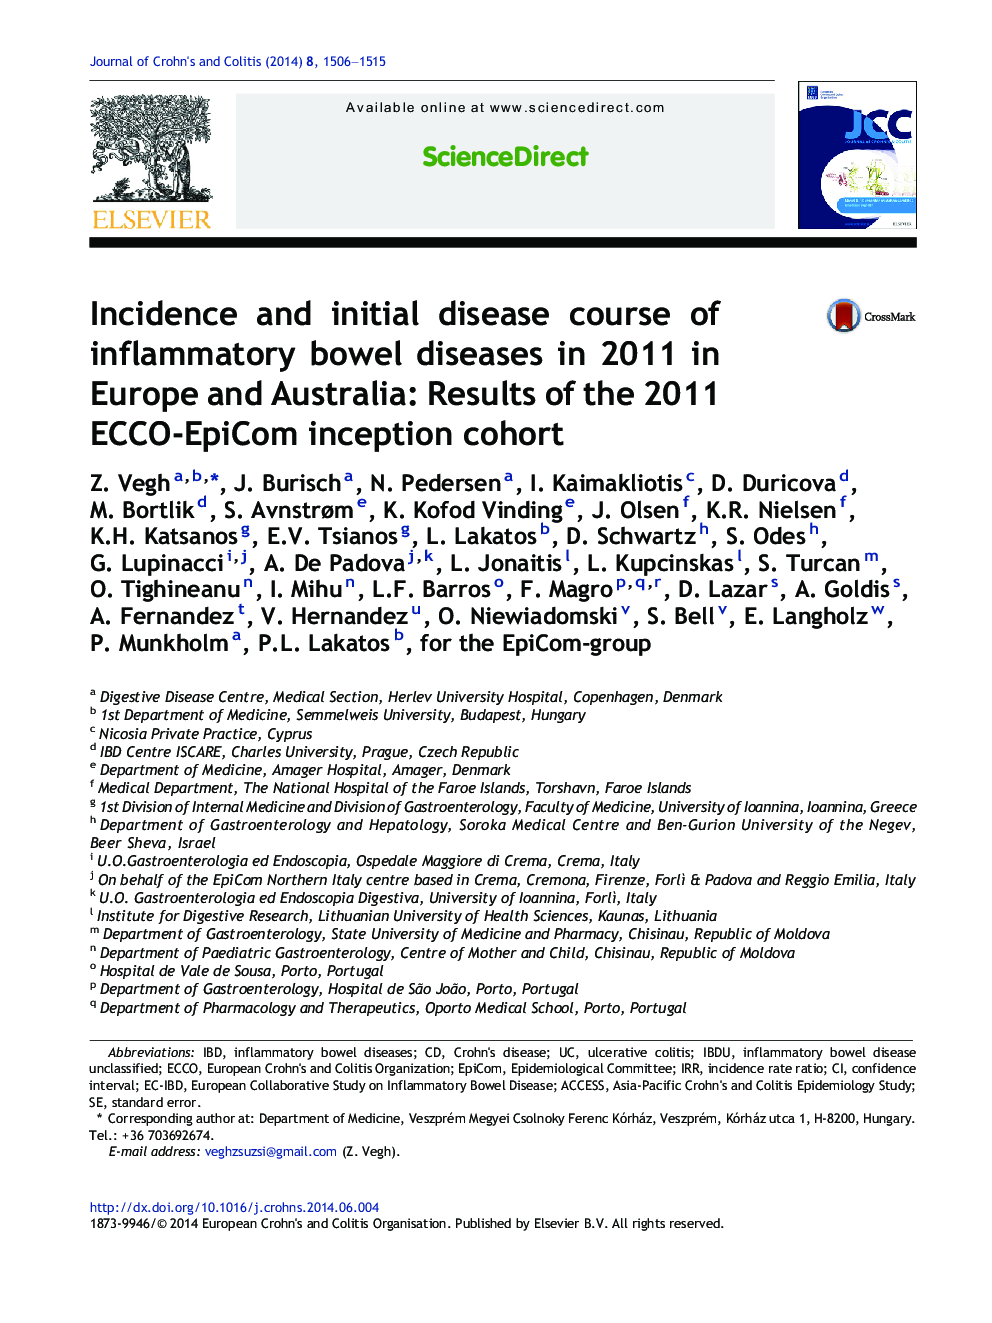 Incidence and initial disease course of inflammatory bowel diseases in 2011 in Europe and Australia: Results of the 2011 ECCO-EpiCom inception cohort